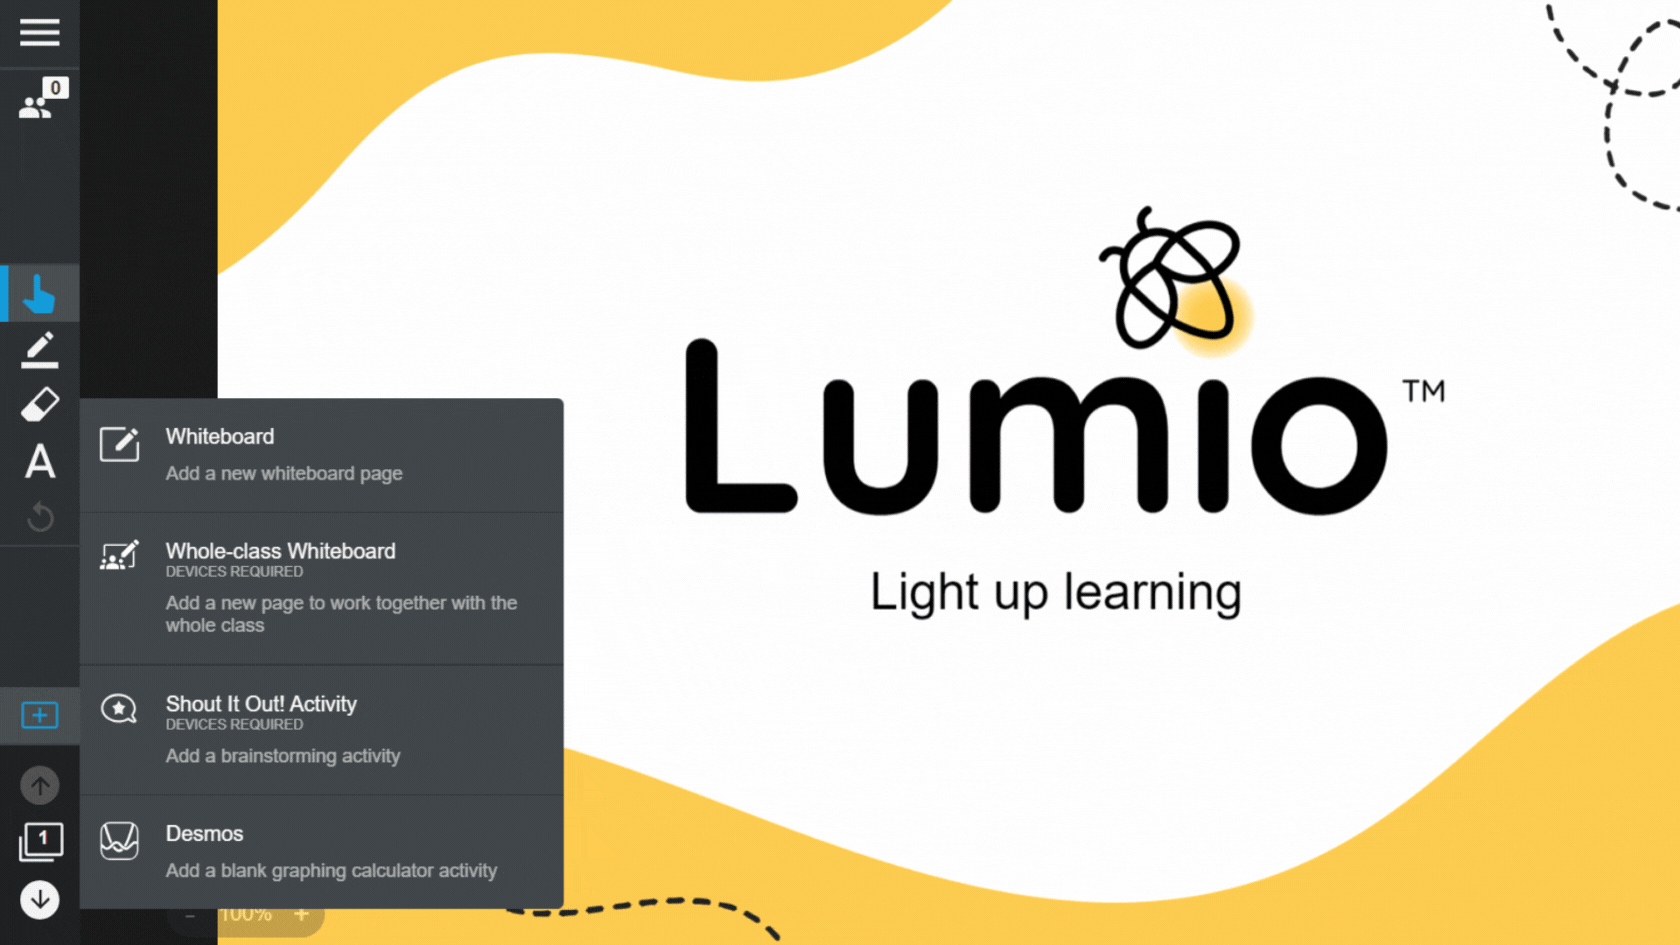 A screenshot of the Lumio application interface. On the left, there's a vertical menu with options like "Whiteboard", "Whole-class Whiteboard", "Shout It Out! Activity", and "Desmos".